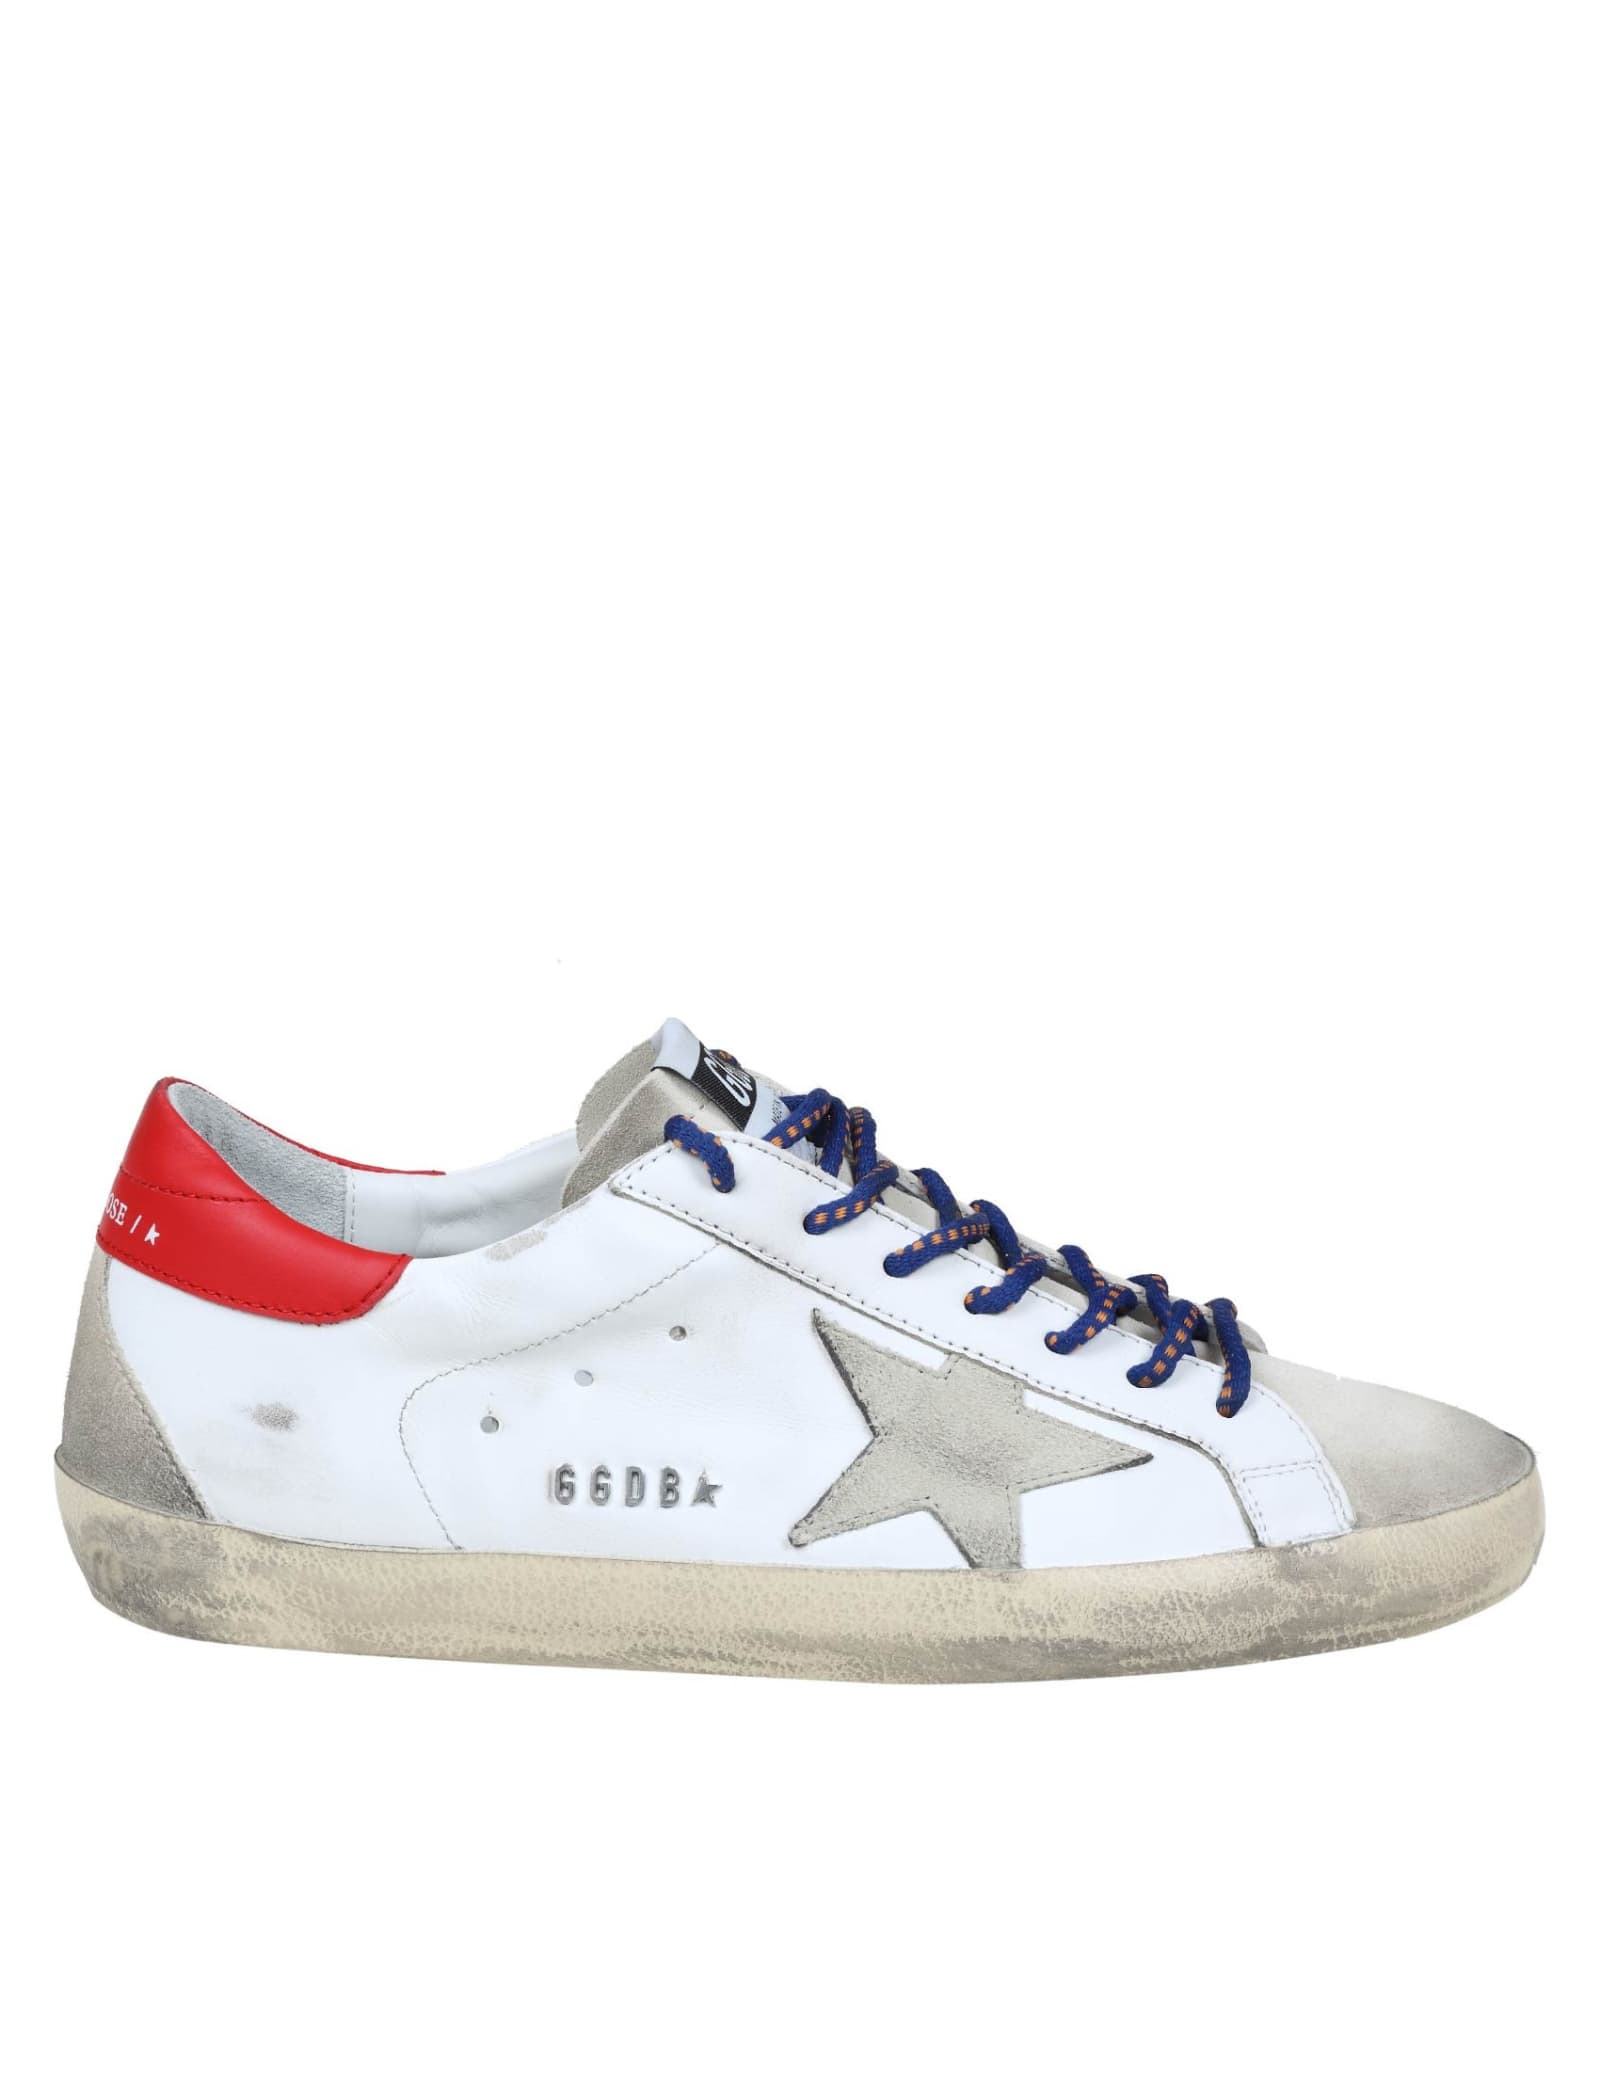 Golden Goose Superstar Sneakers In White Leather And Suede